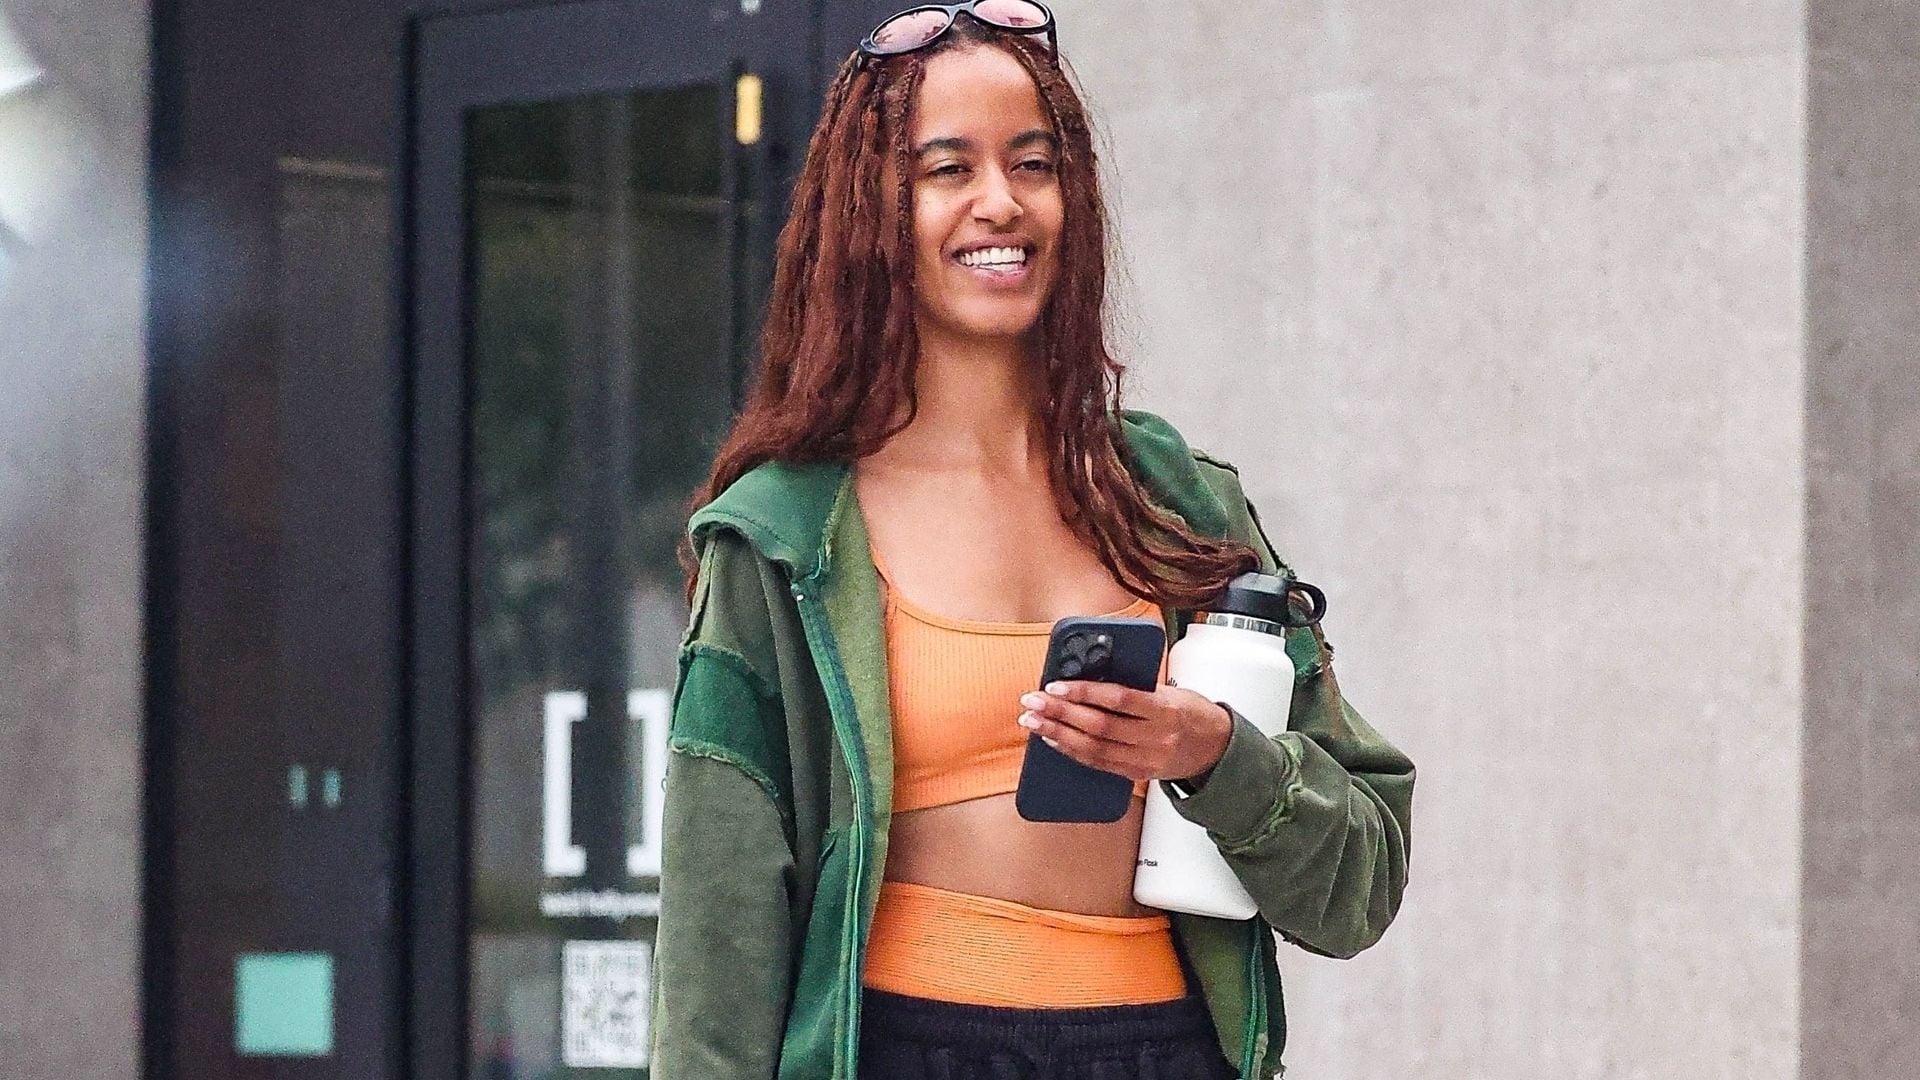 Malia Obama was seen leaving Solidcore gym with a friend, looking happy and refreshed after a workout. Malia looked radiant post-workout as she exited in an orange workout set showing off her toned midriff.